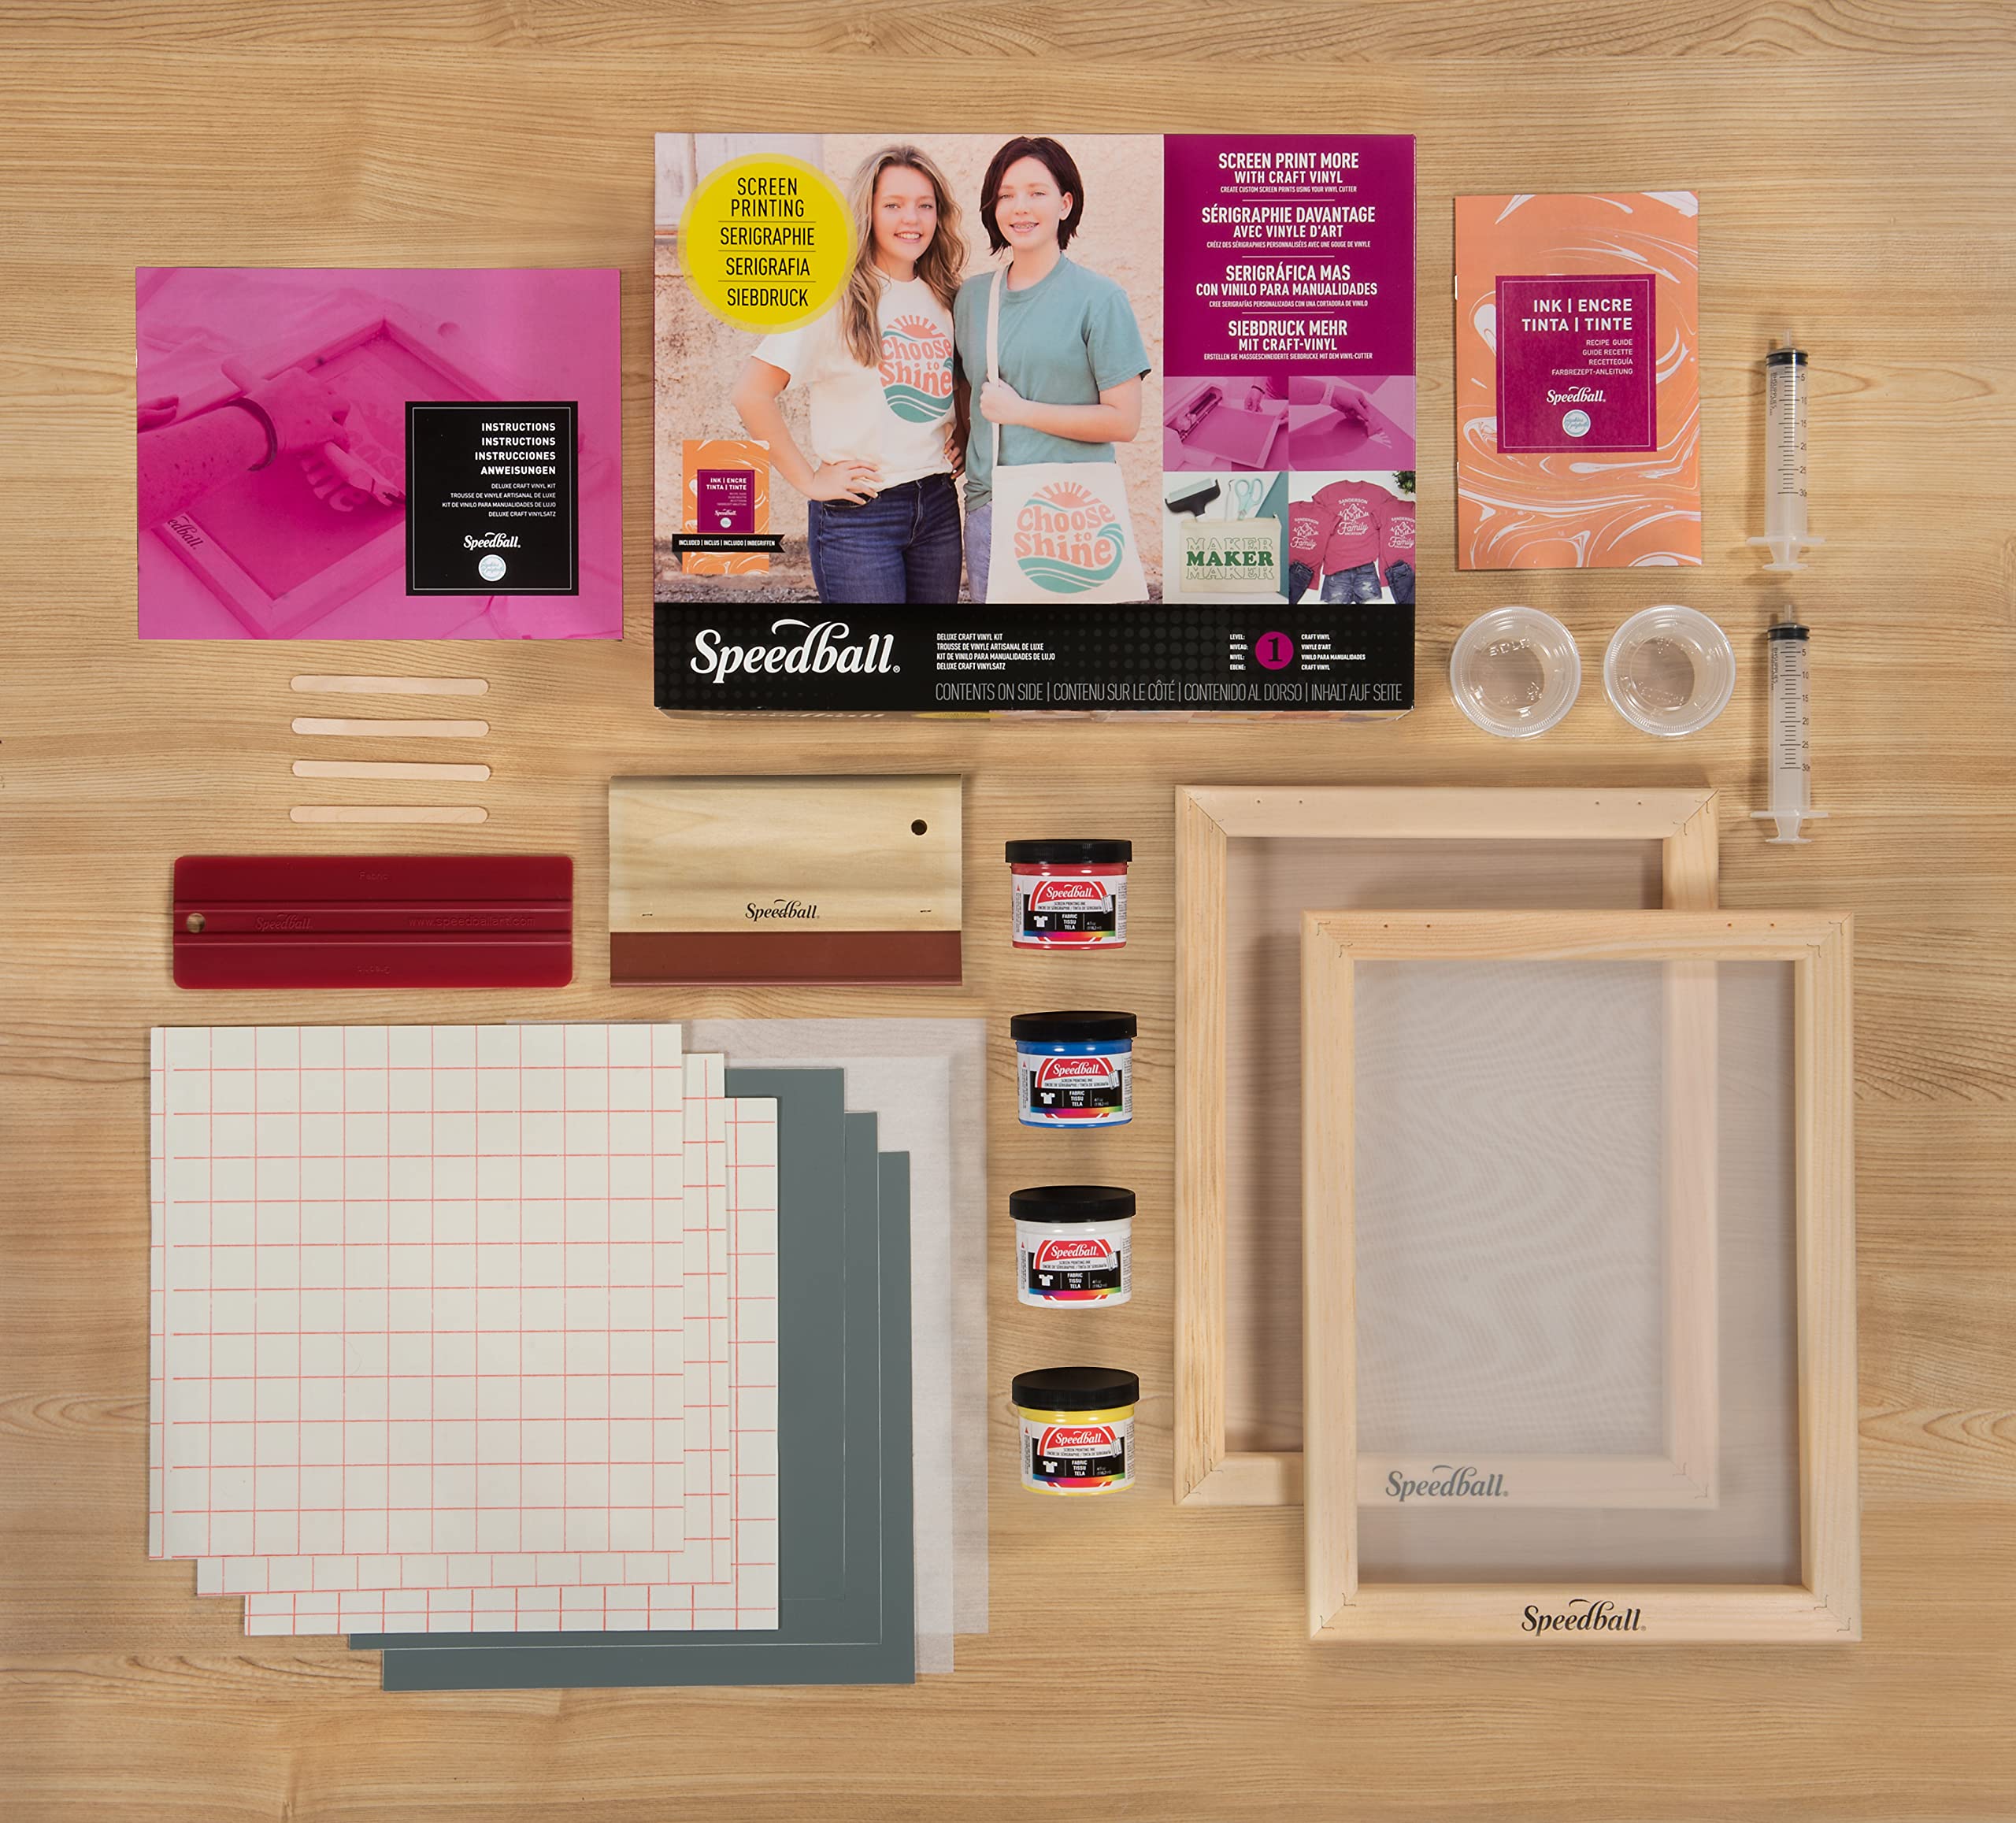 Speedball Deluxe Screen Printing Craft Vinyl Kit - Use with Cutting Machine to Print T-Shirts and Home Decor